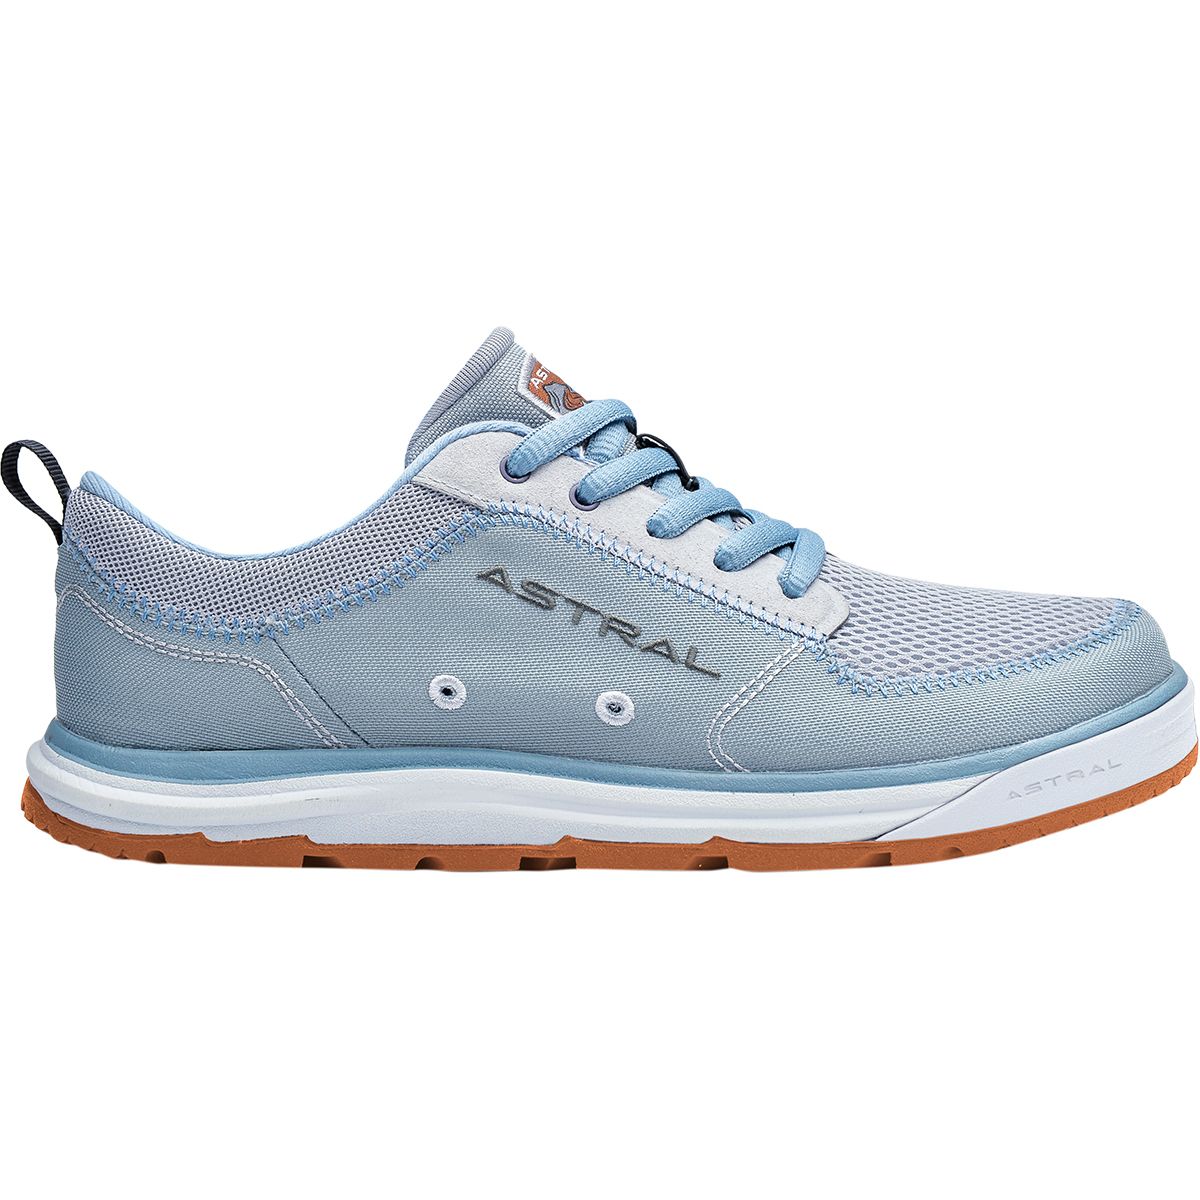 Astral Brewess 2 Water Shoe - Women's